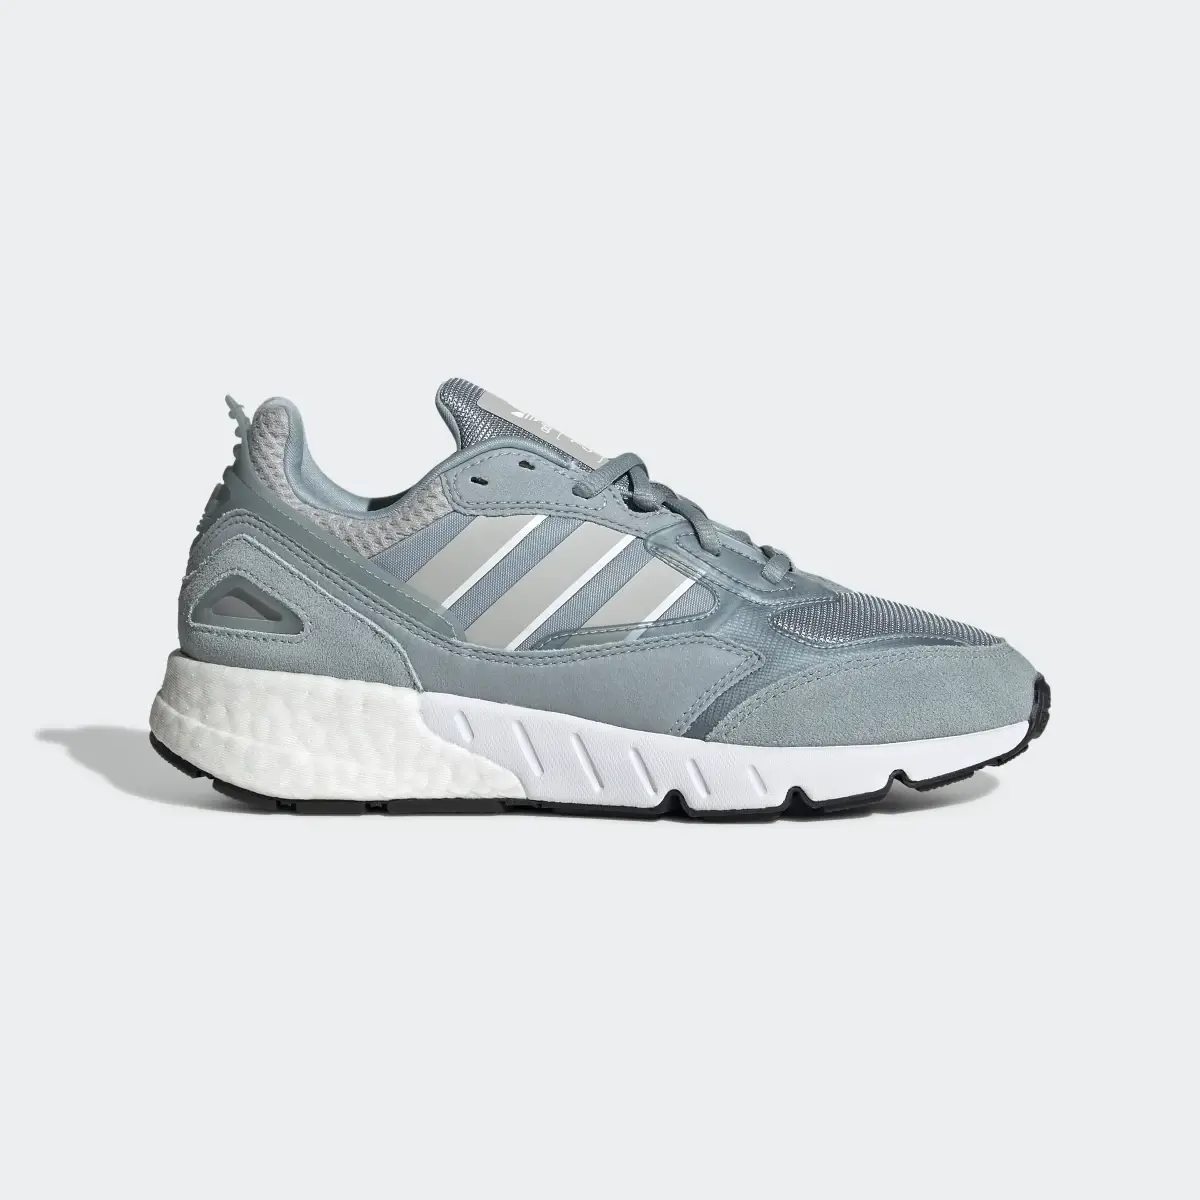 Adidas ZX 1K BOOST 2.0 Shoes. 2